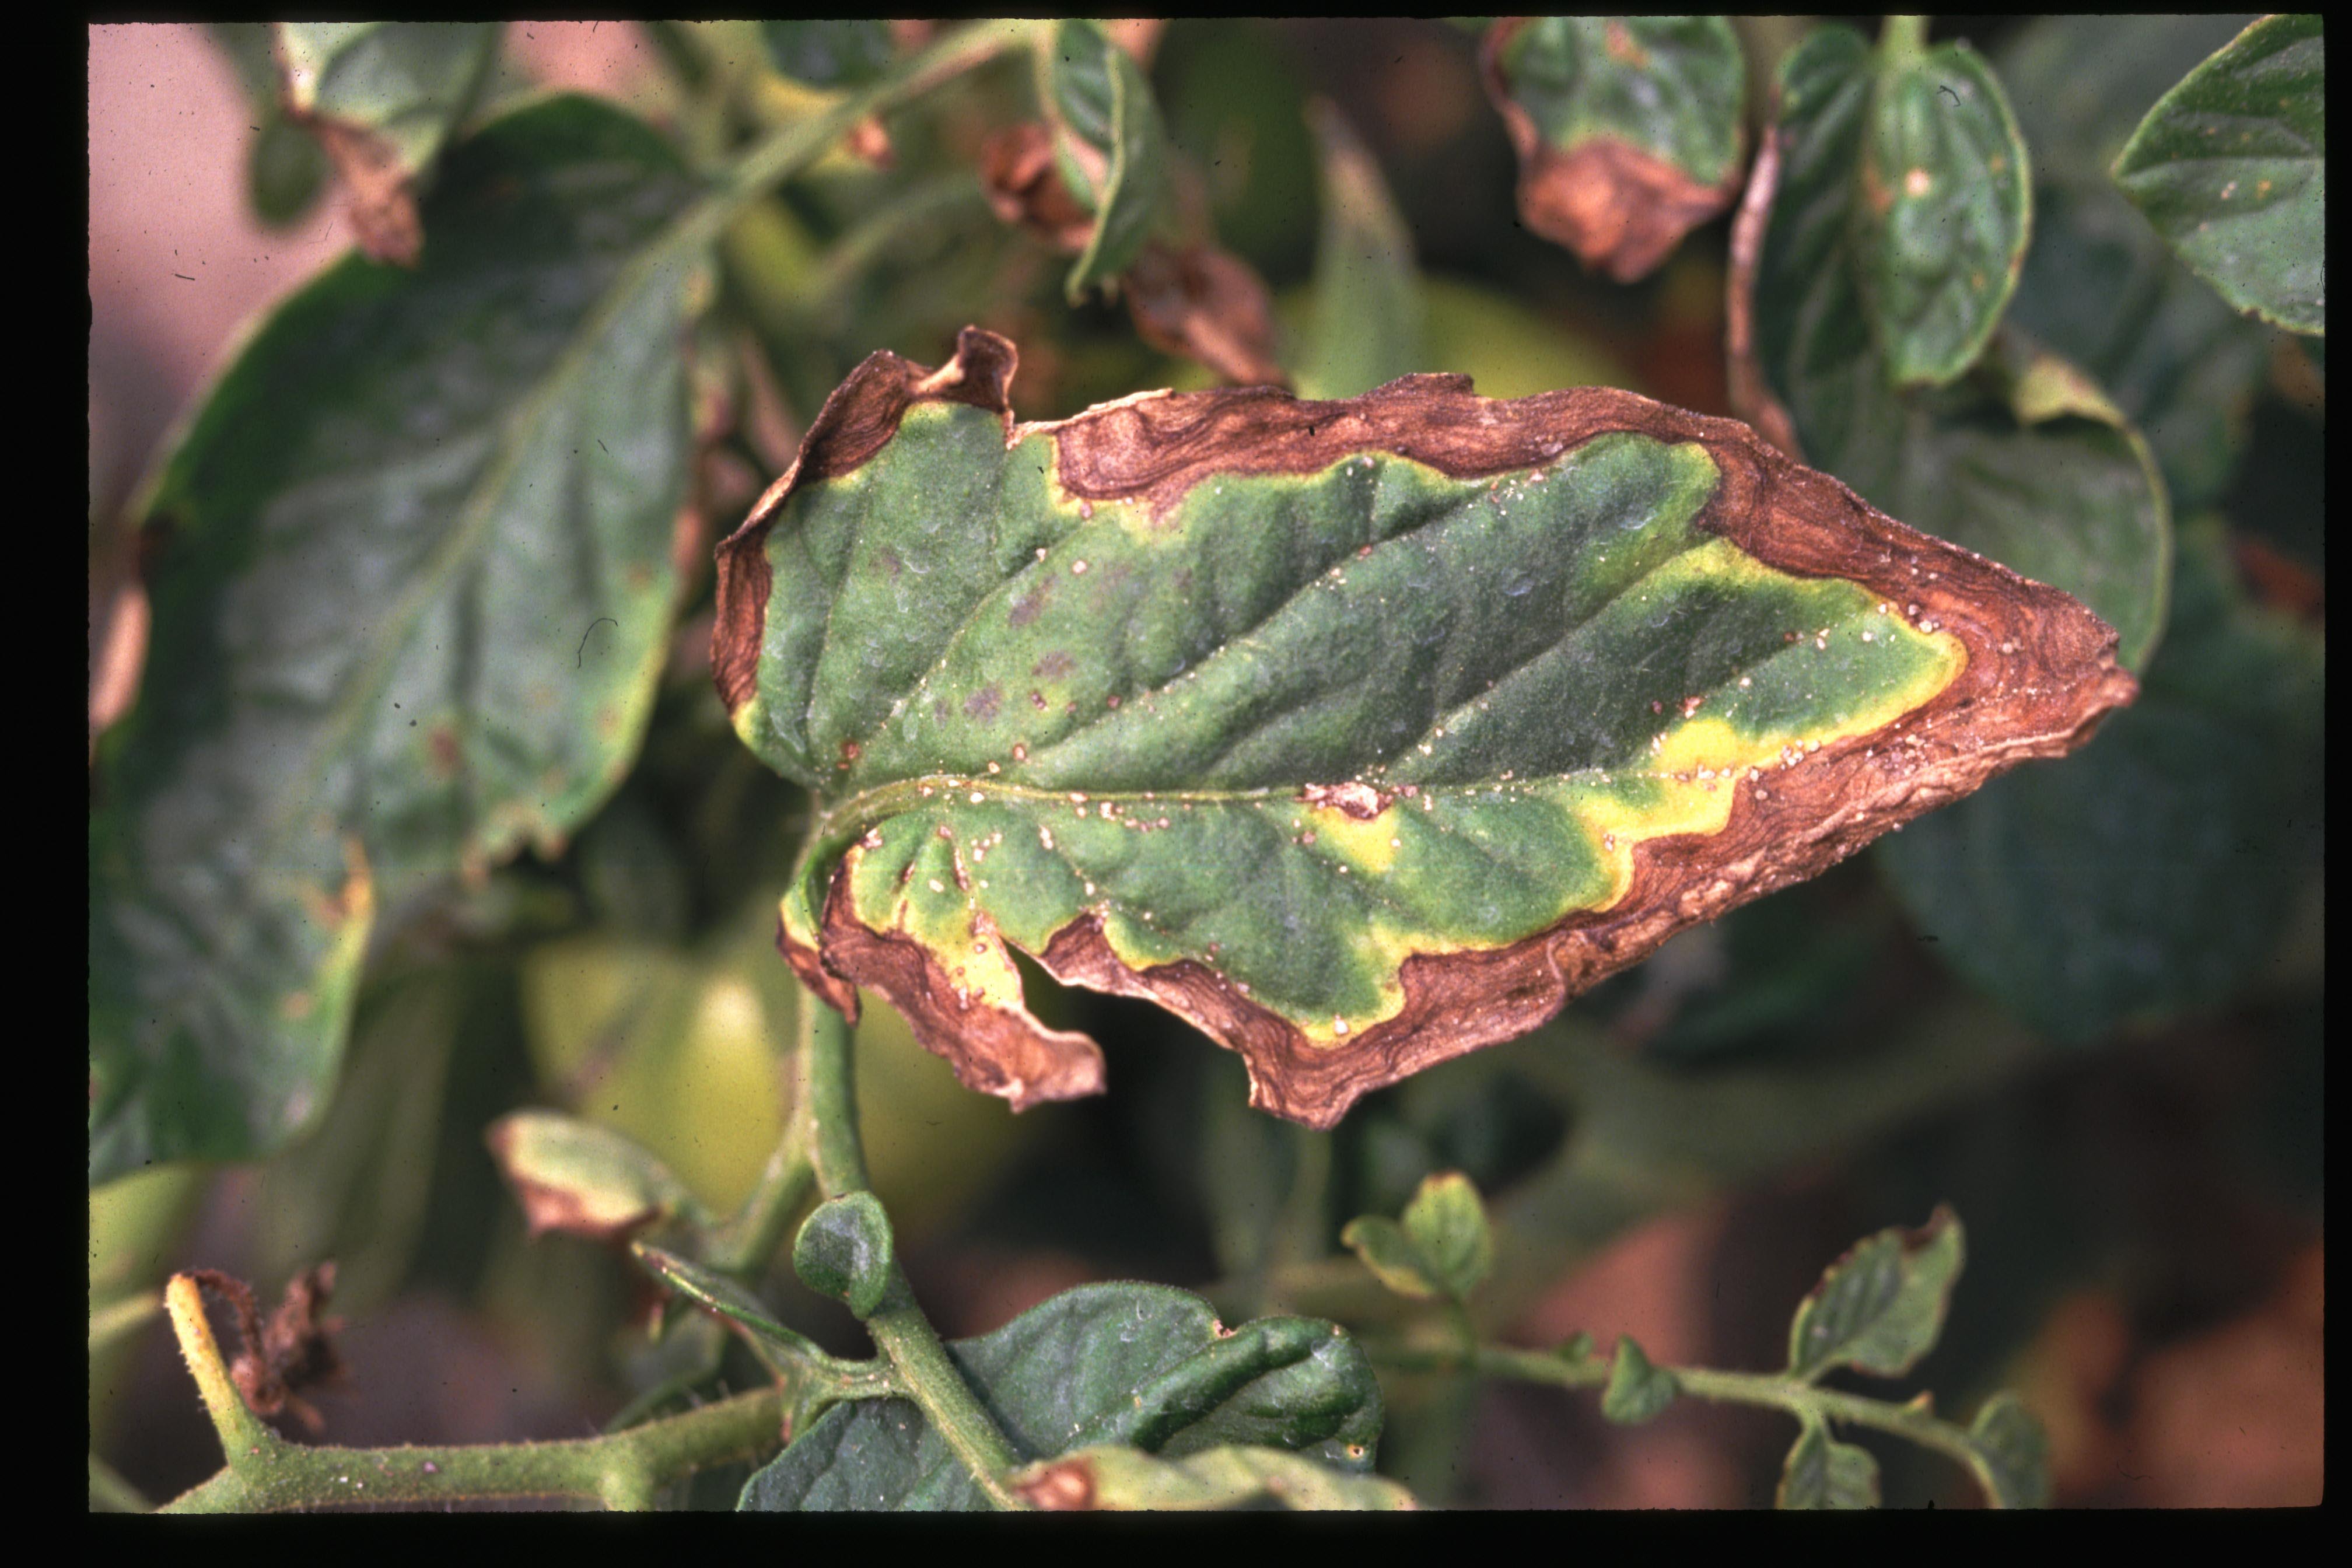 Bacterial canker symptoms on tomato leaflet, showing yellow border between live and dead tissue